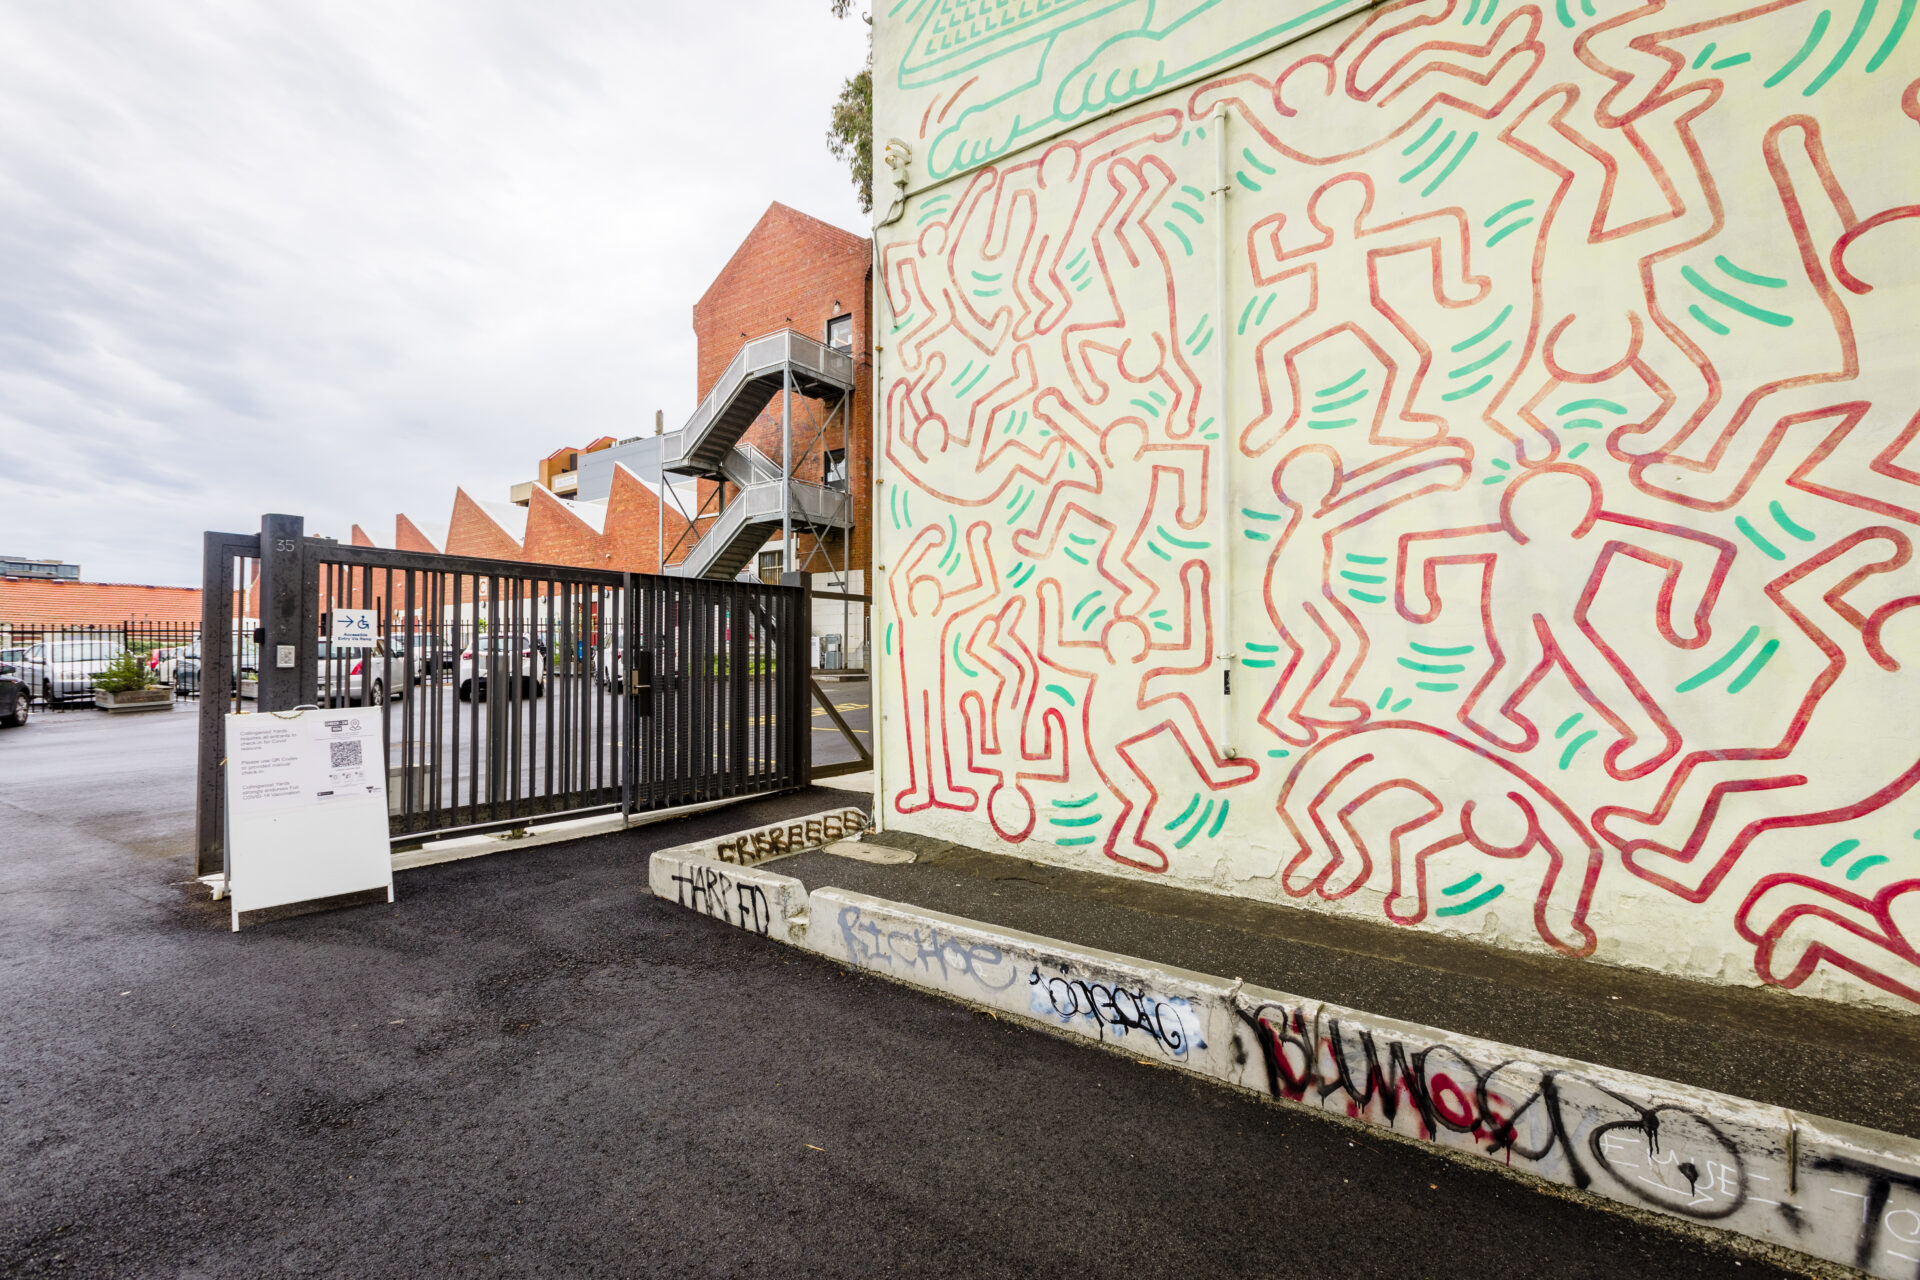 Photo of Collingwood Yards Keith Haring mural. The mural is painted outlines of people characters with scattered green lines in between. To The left of the mural is a security gate. The ground is black asphalt and there is some graffitied concrete below the mural.